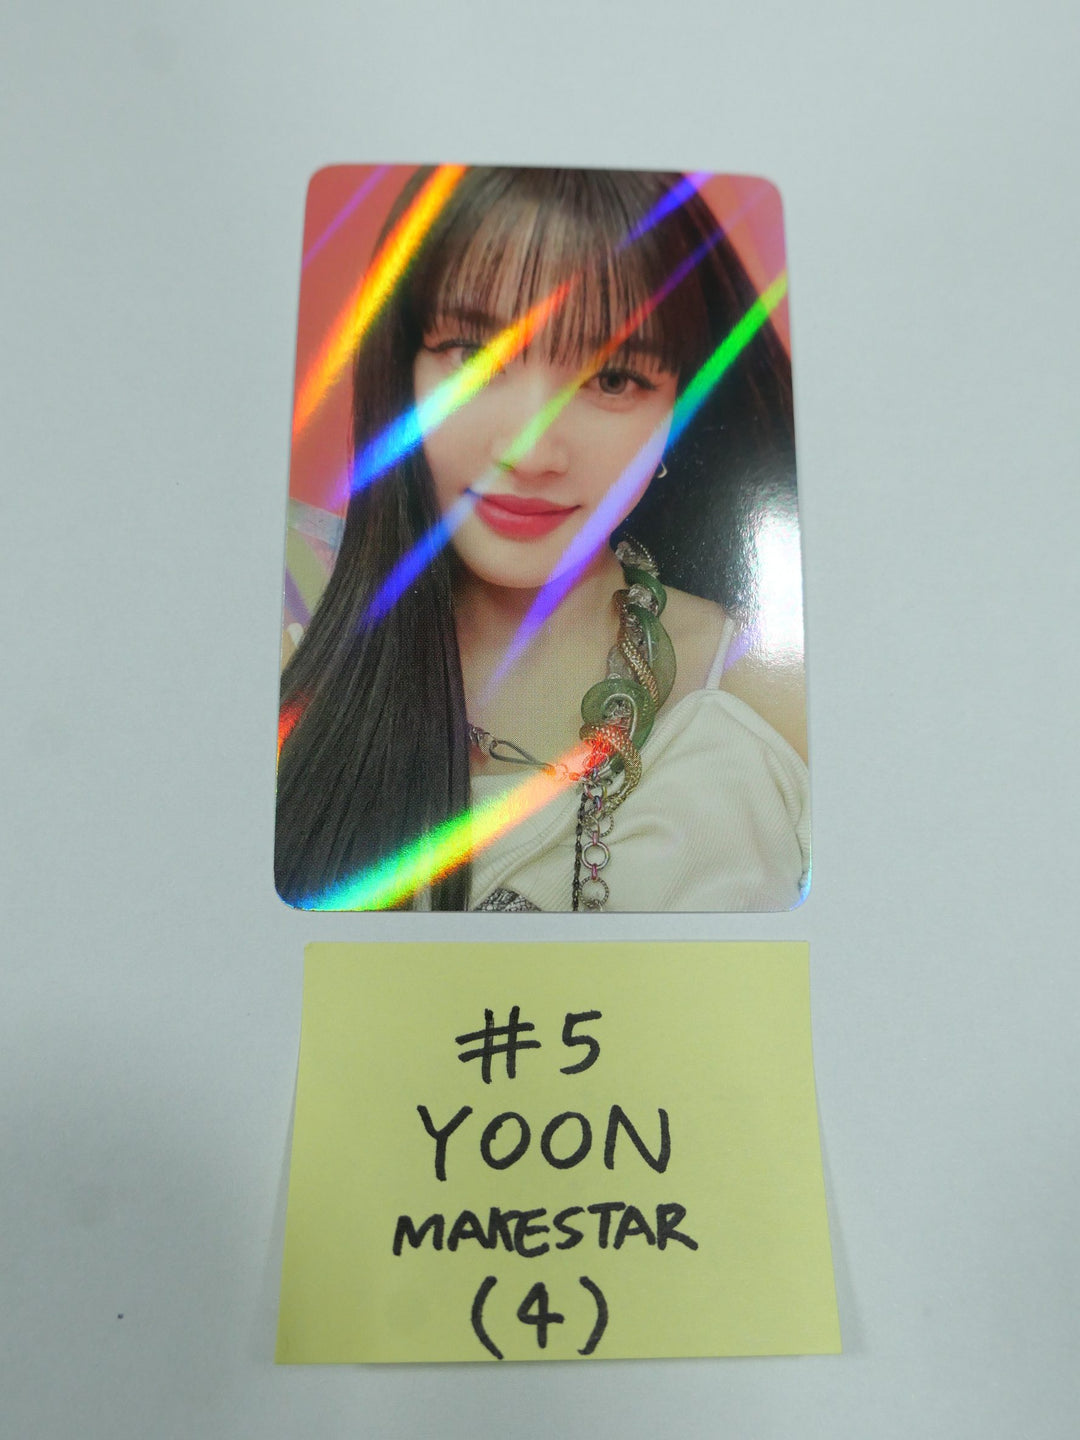 StayC 'YOUNG-LUV.COM' - Makestar Pre-Order Benefit Hologram Photocard